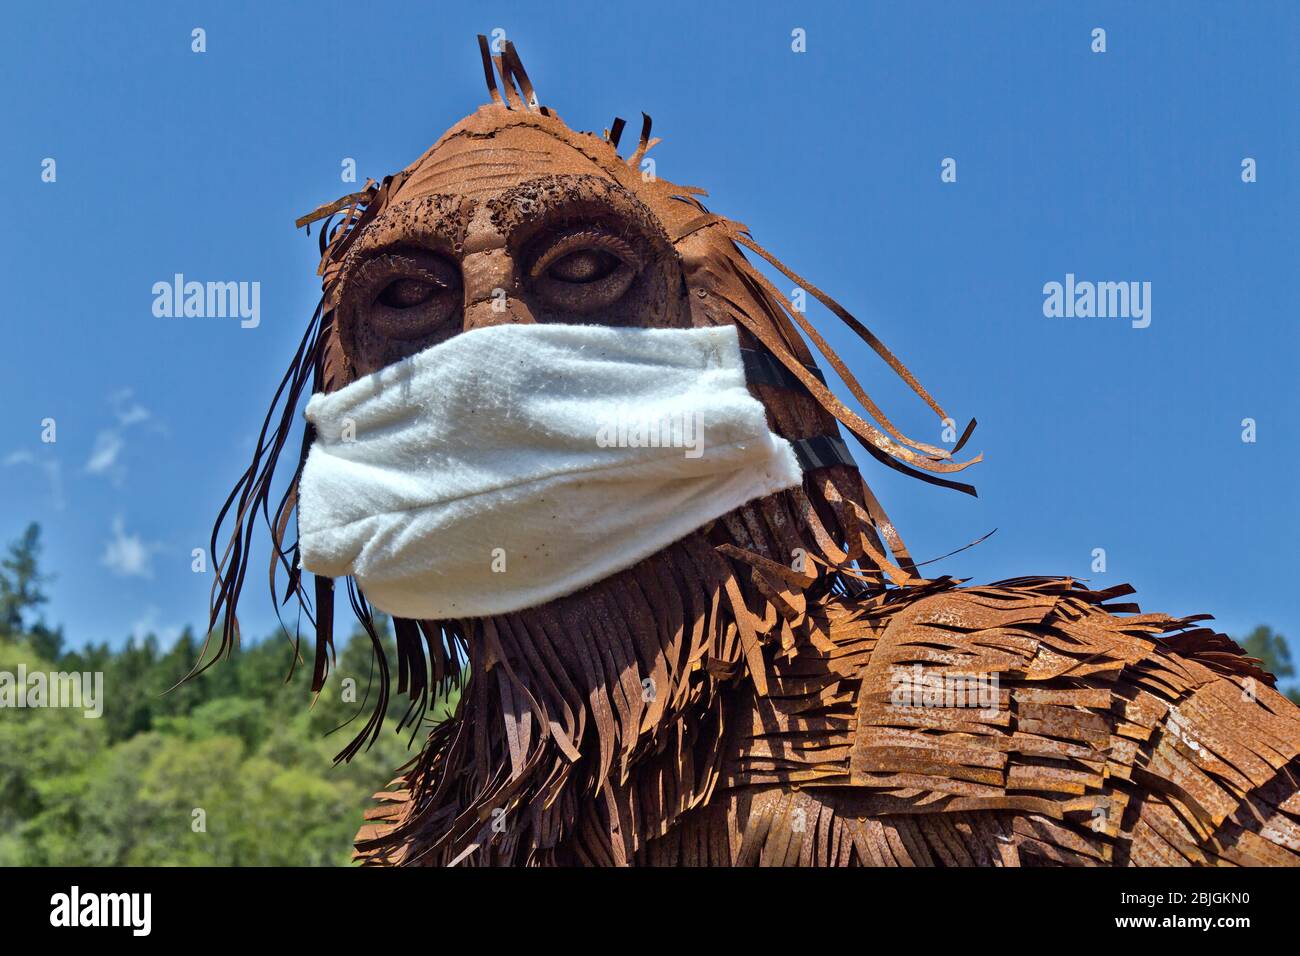 Bigfoot wearing COVID-19  antivirus mask, passing through cultivated field, forest edge. Stock Photo